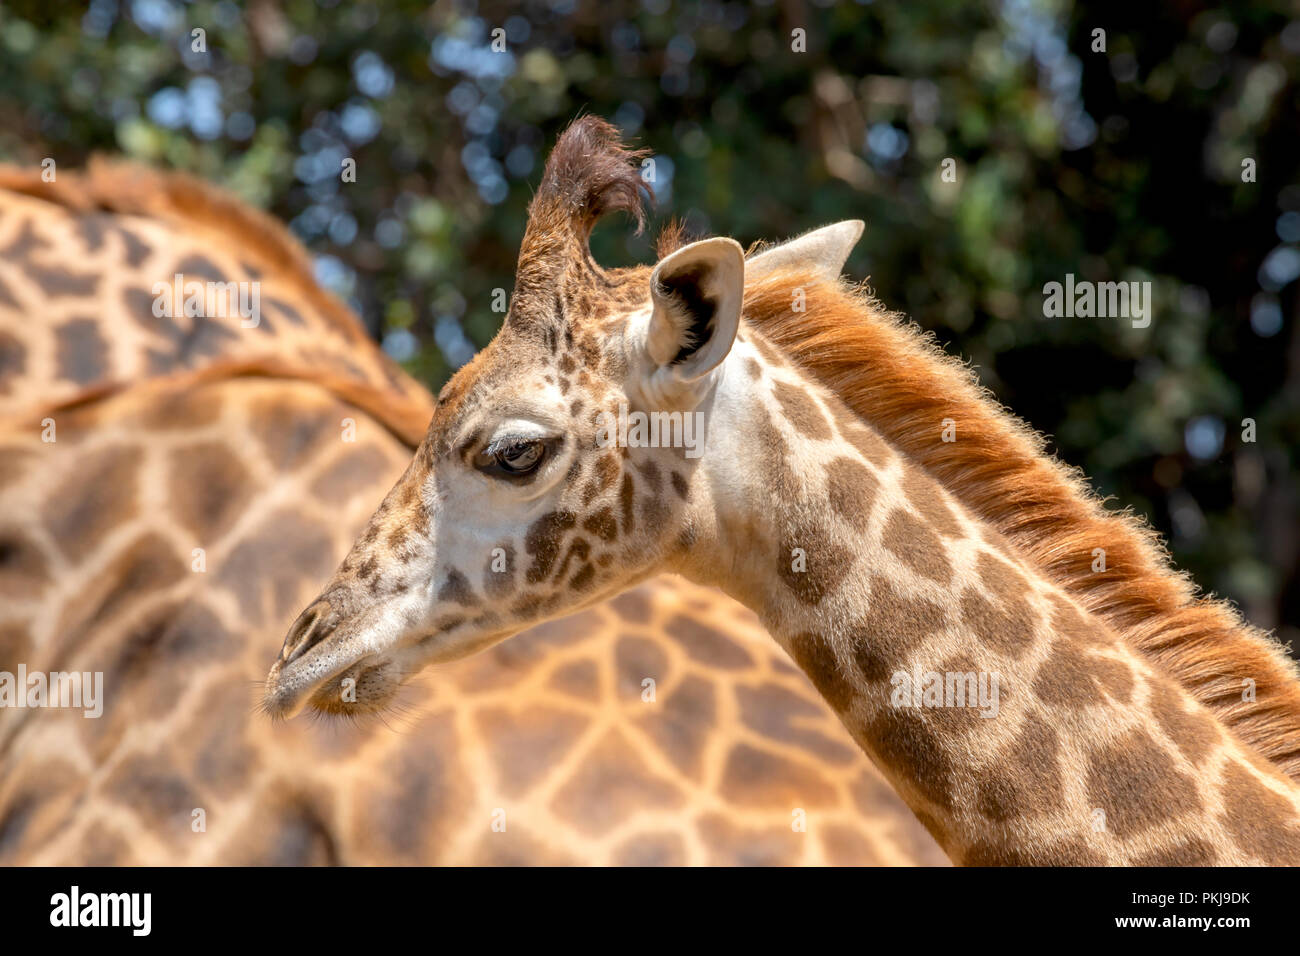 One year old giraffe with her parents Stock Photo